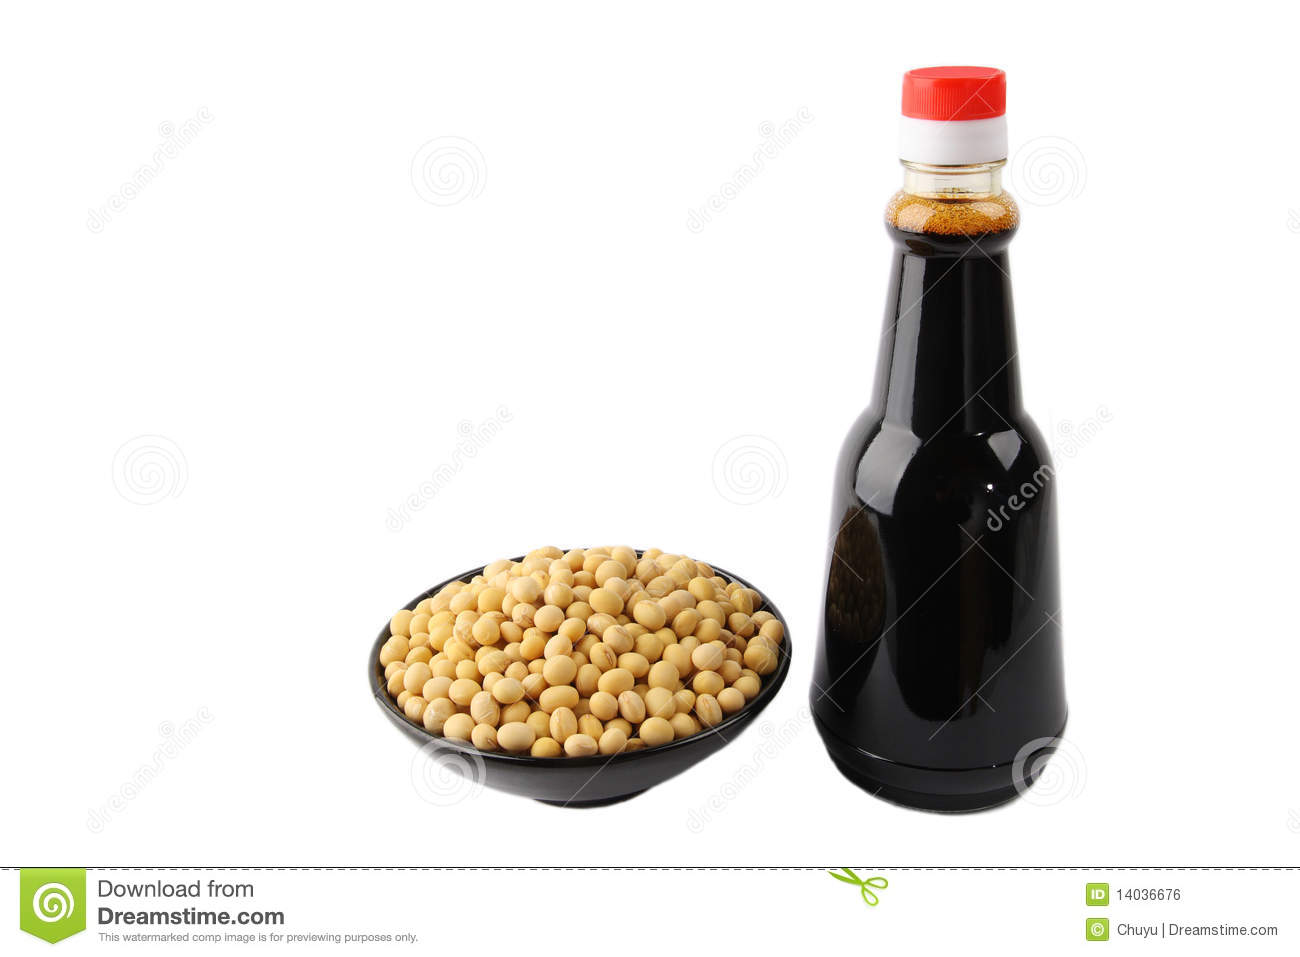 Soy Sauce And Soybean Royalty Free Stock Image   Image  14036676